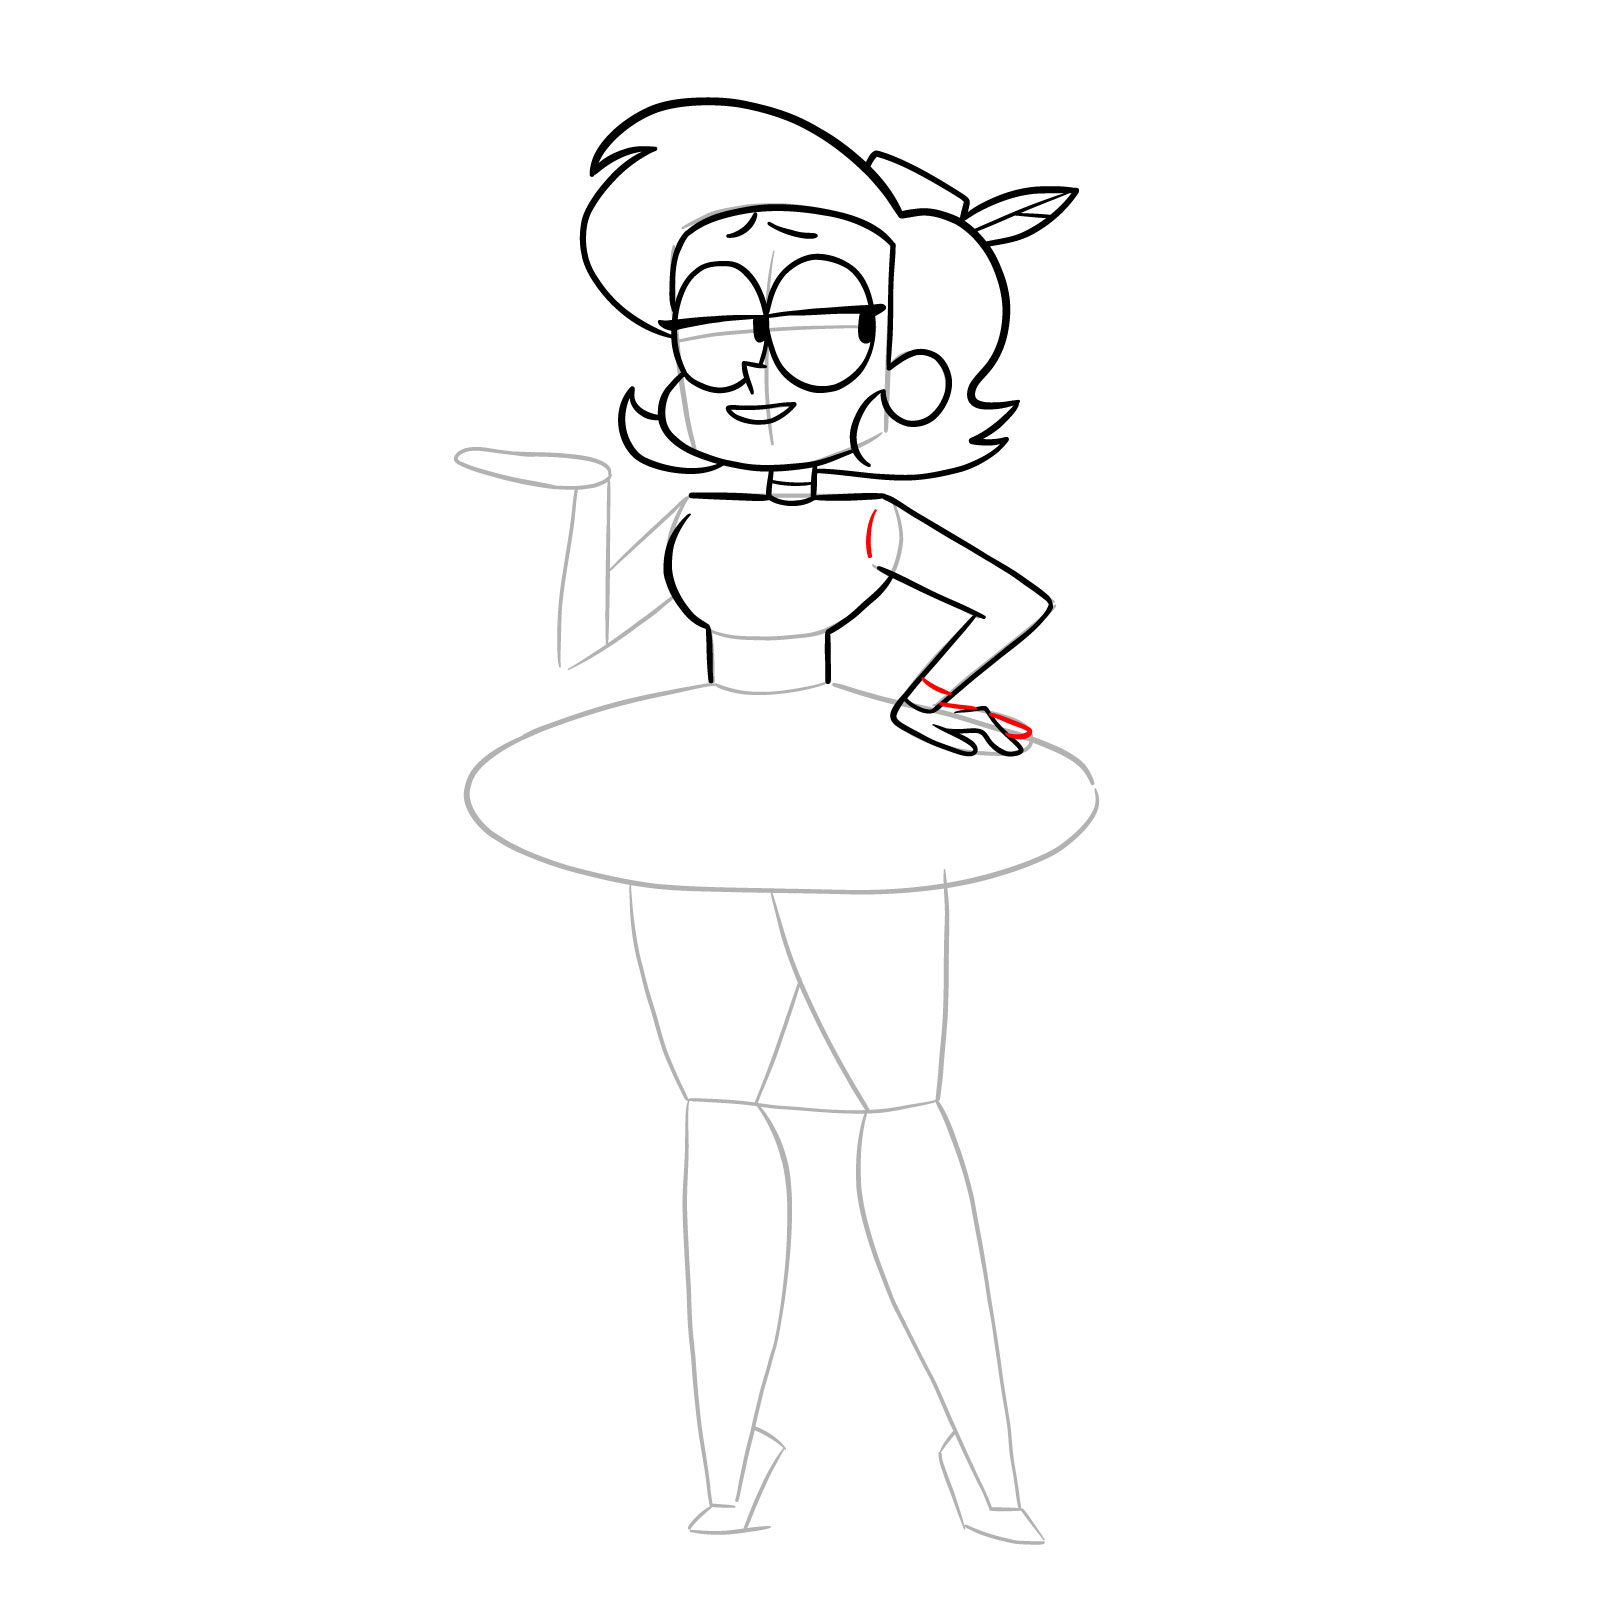 How to draw Elodie from OK K.O.! - step 20